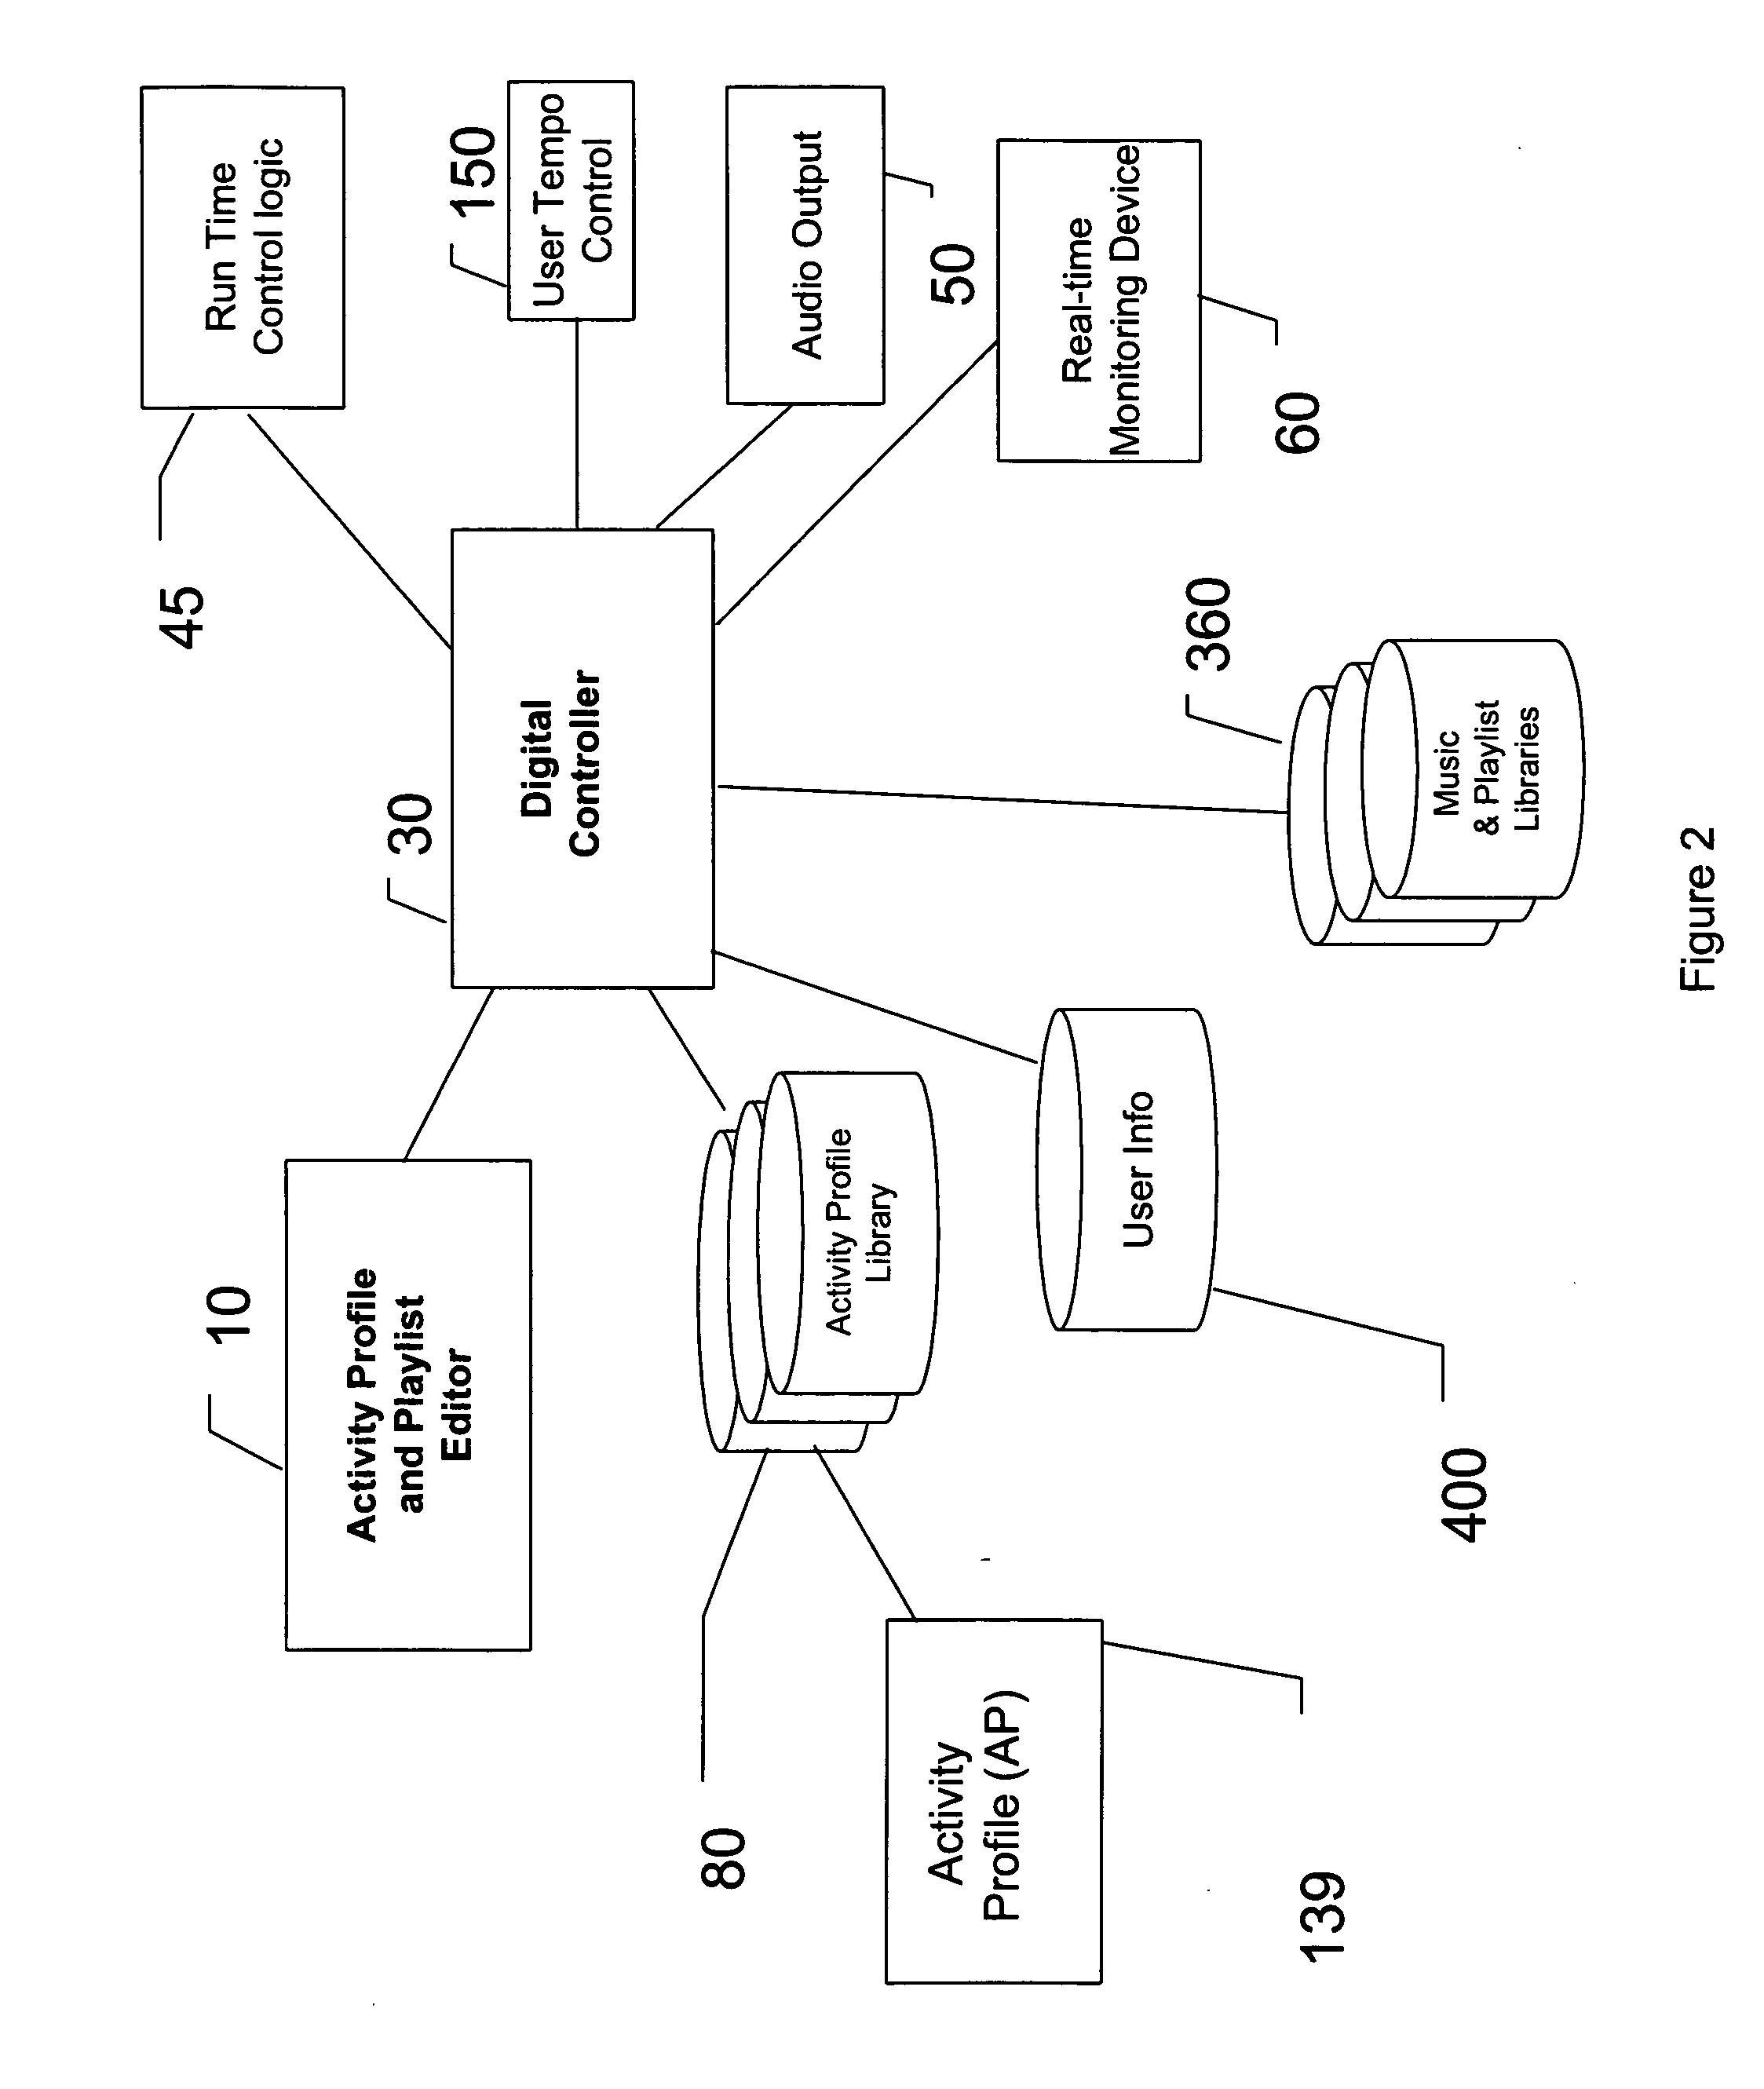 System and method for tailoring music to an activity based on an activity goal